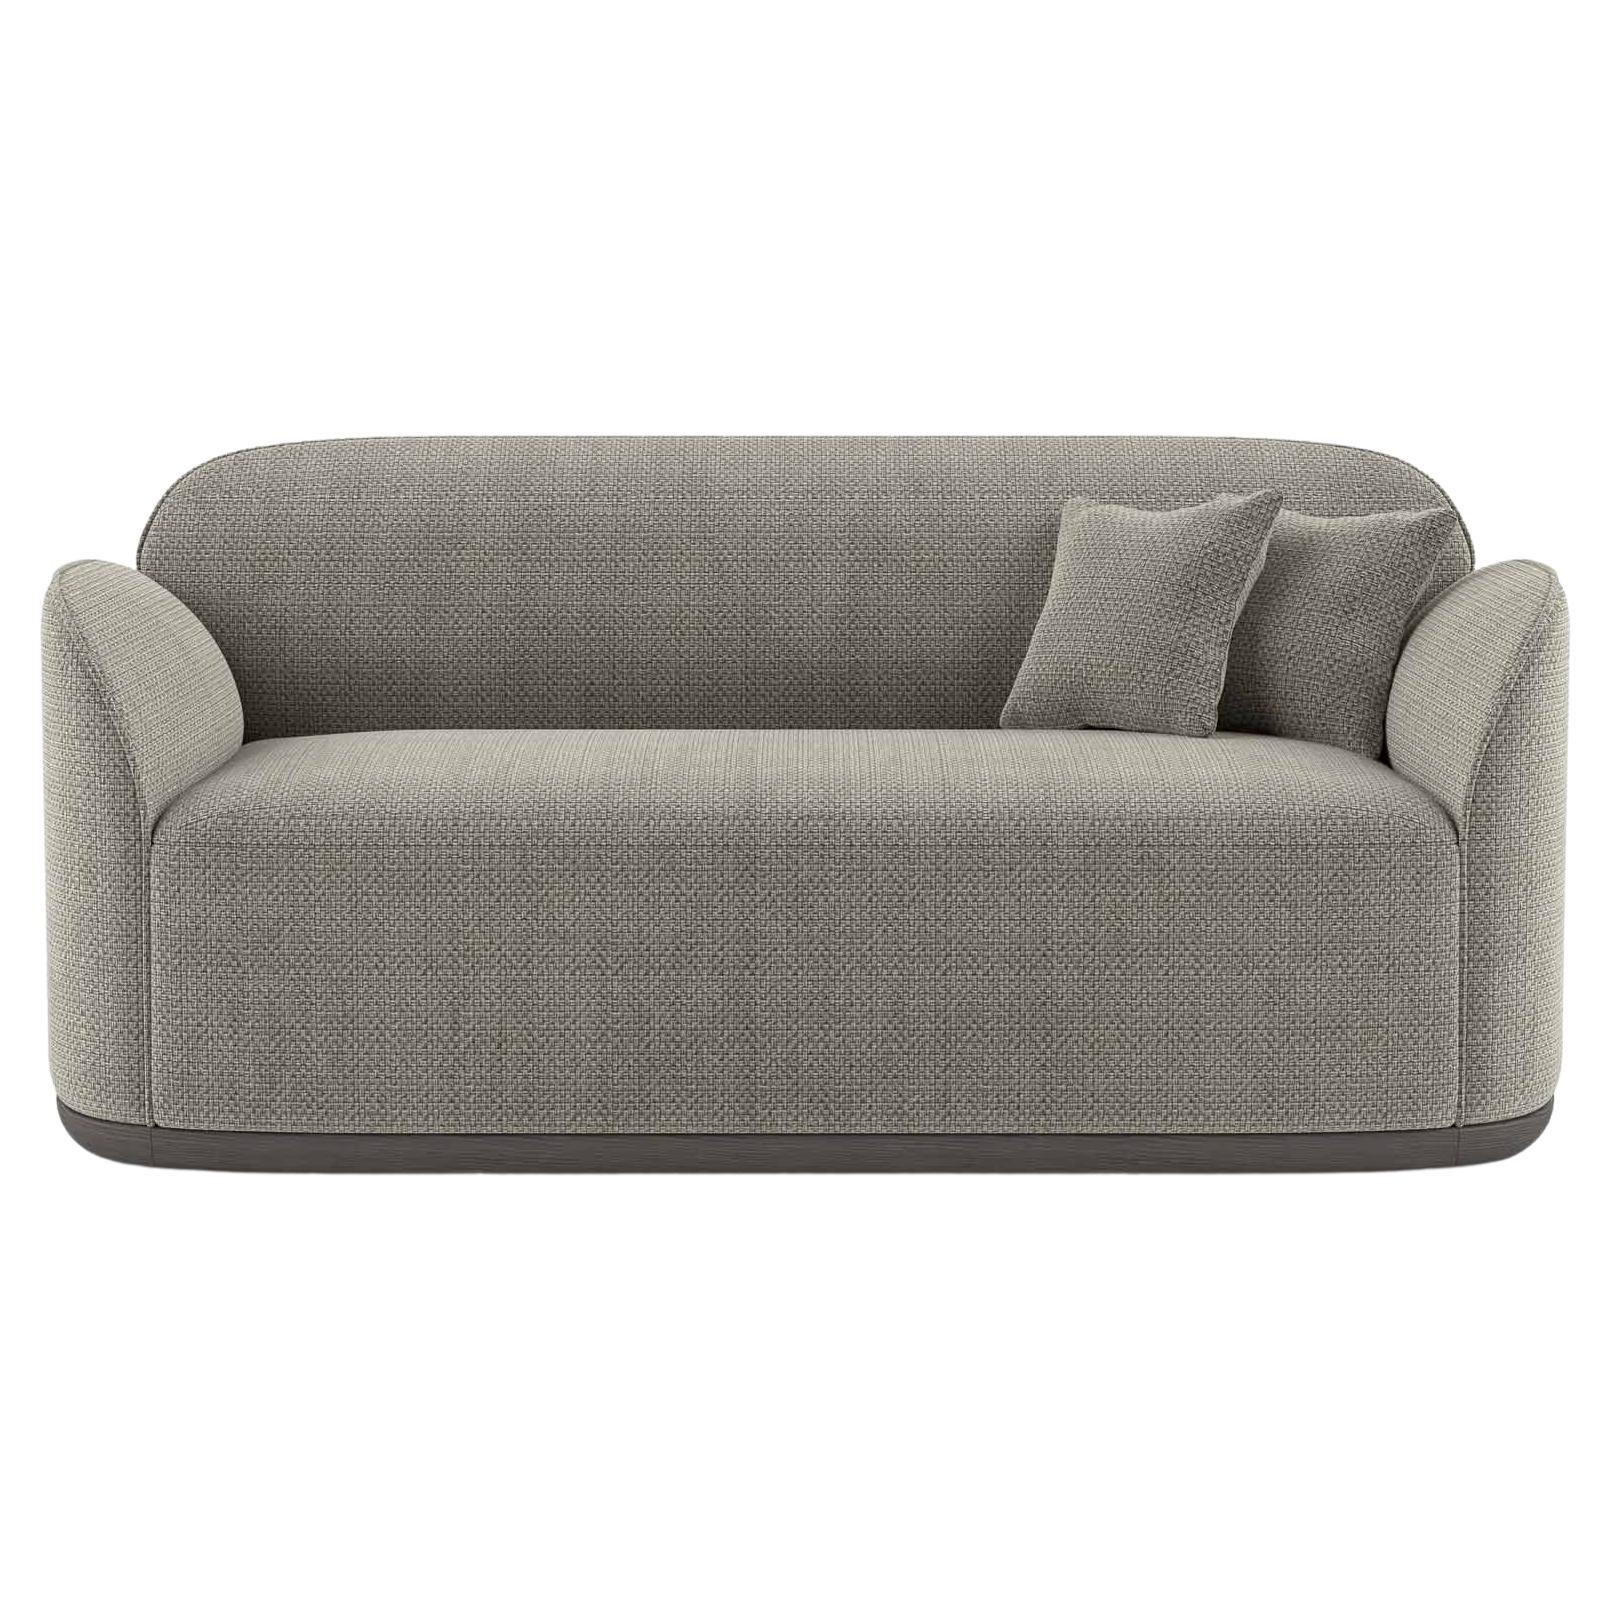 Contemporary Loveseat 'Unio' by Poiat, Fabric Hanoi 04 by Pierre Frey